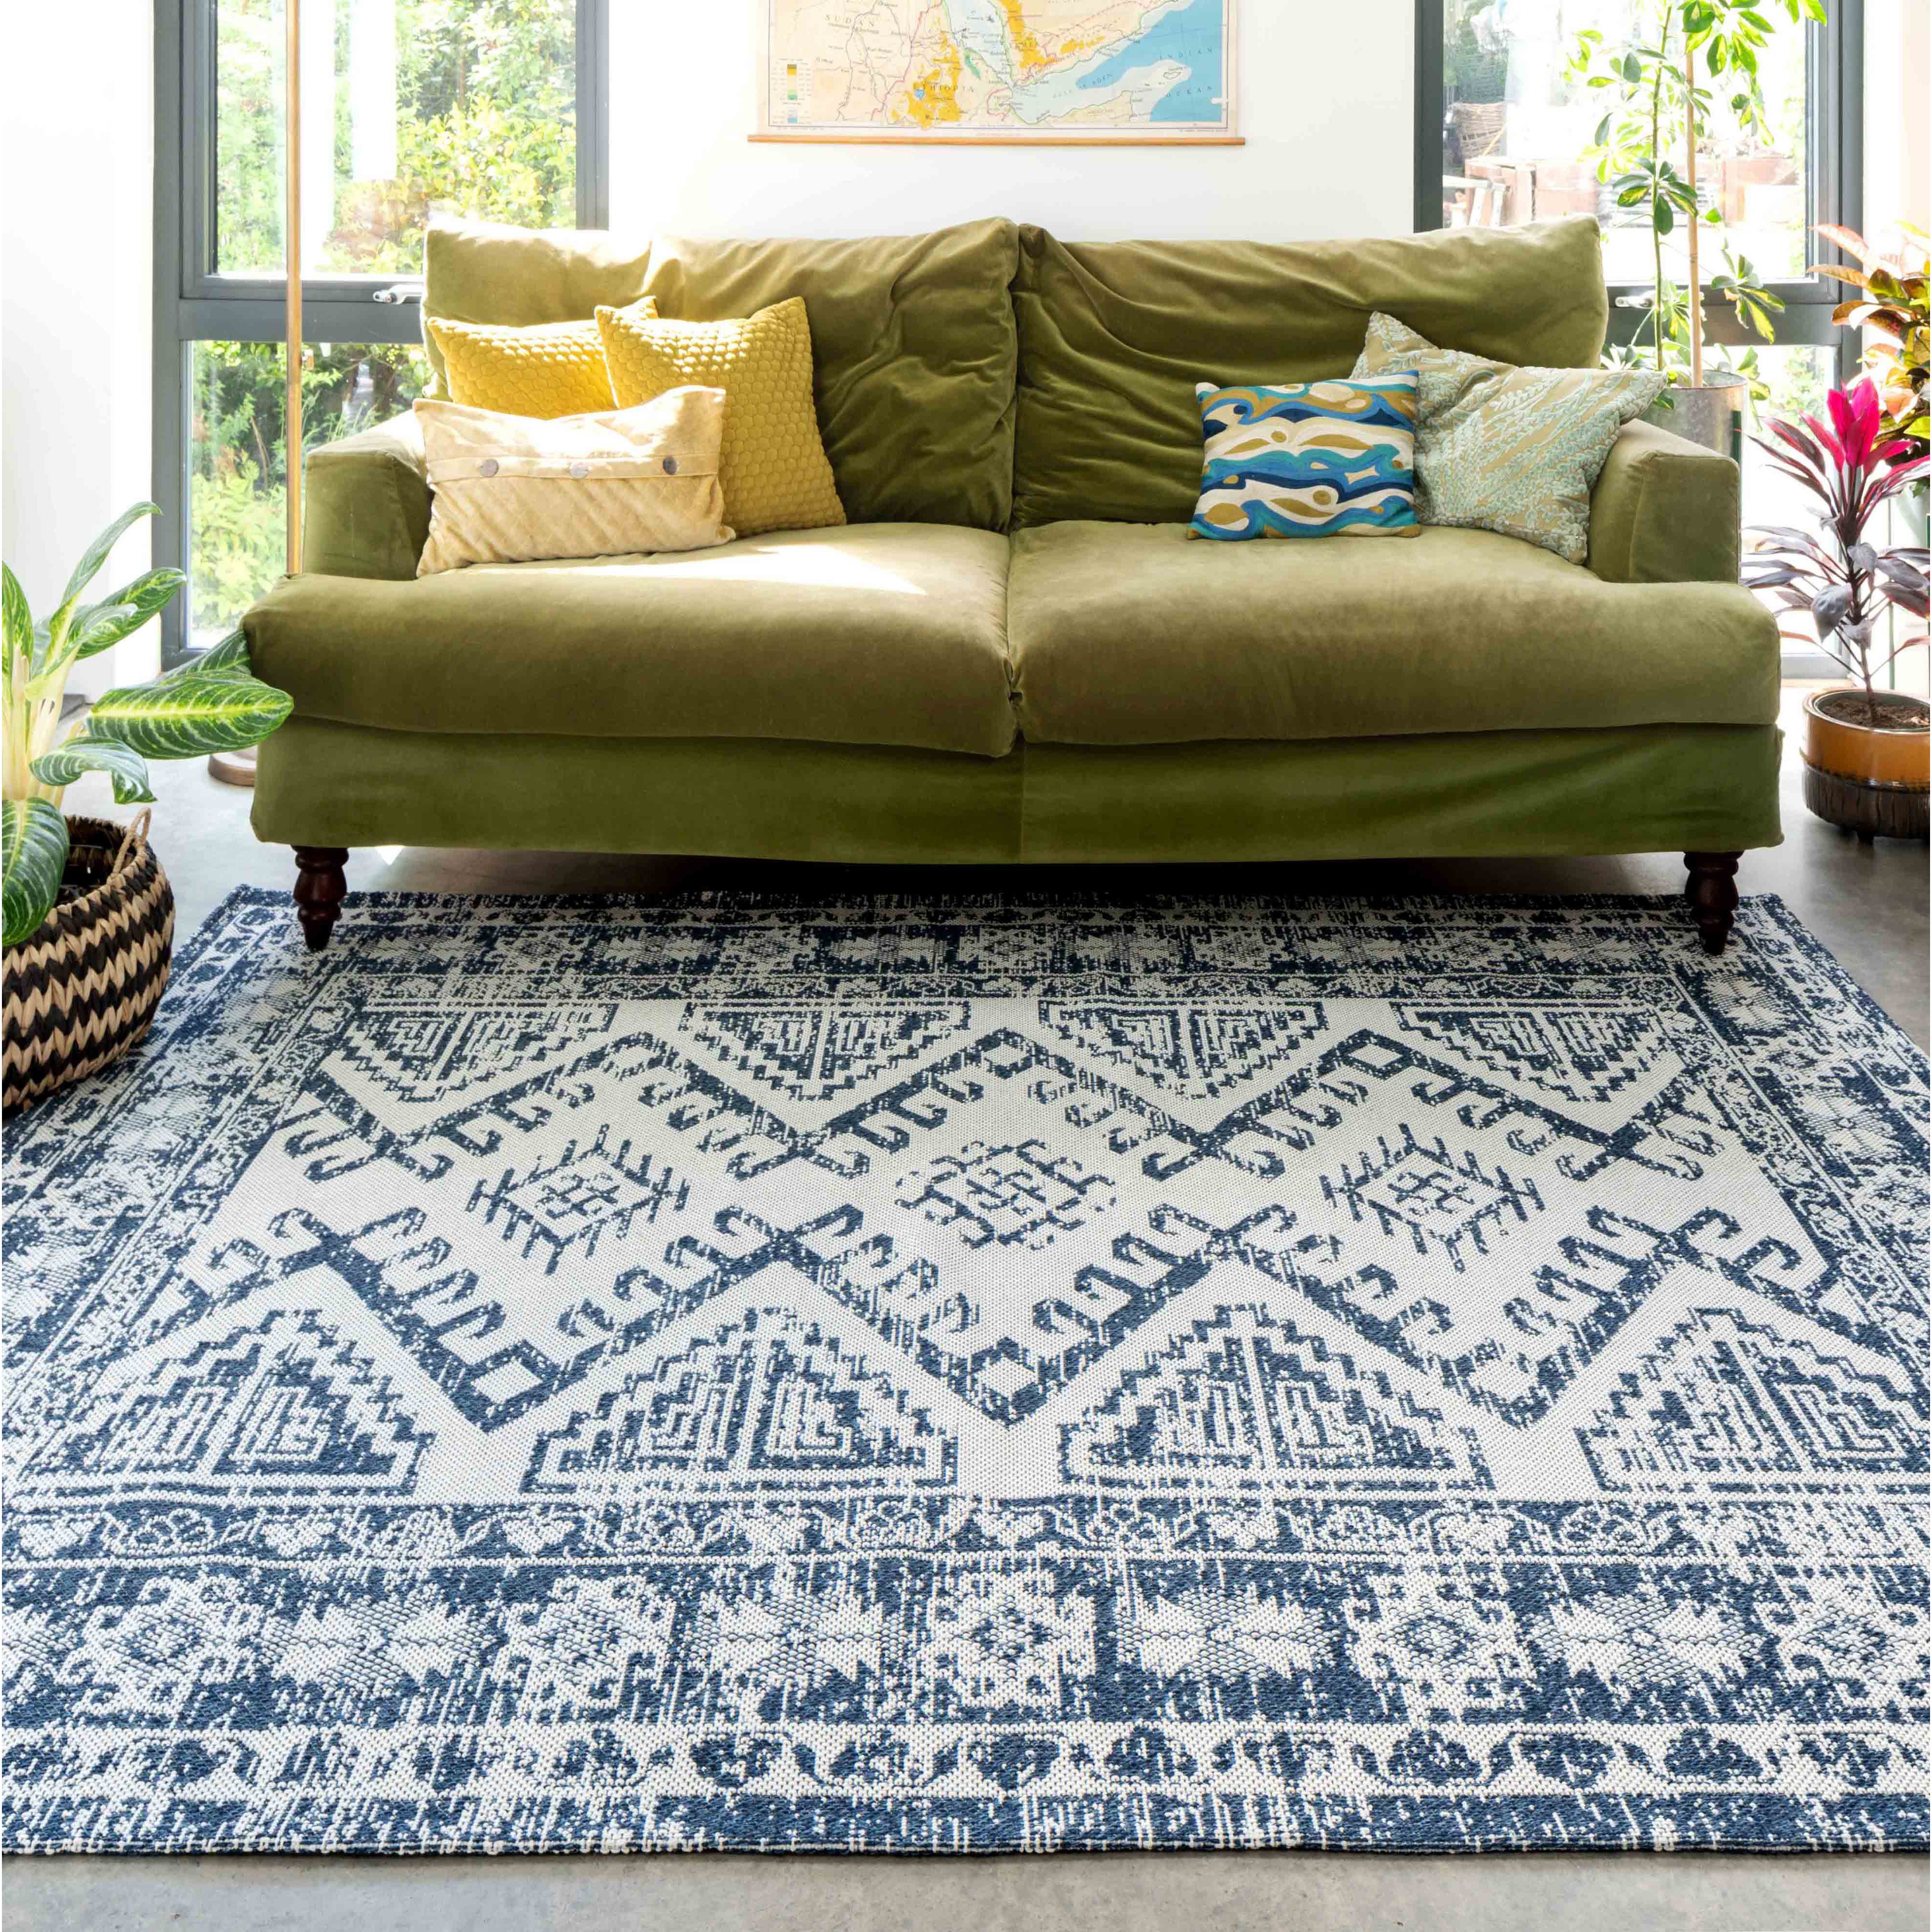 Distressed Vintage Blue Woven Sustainable Recycled Cotton Rug - Kendall